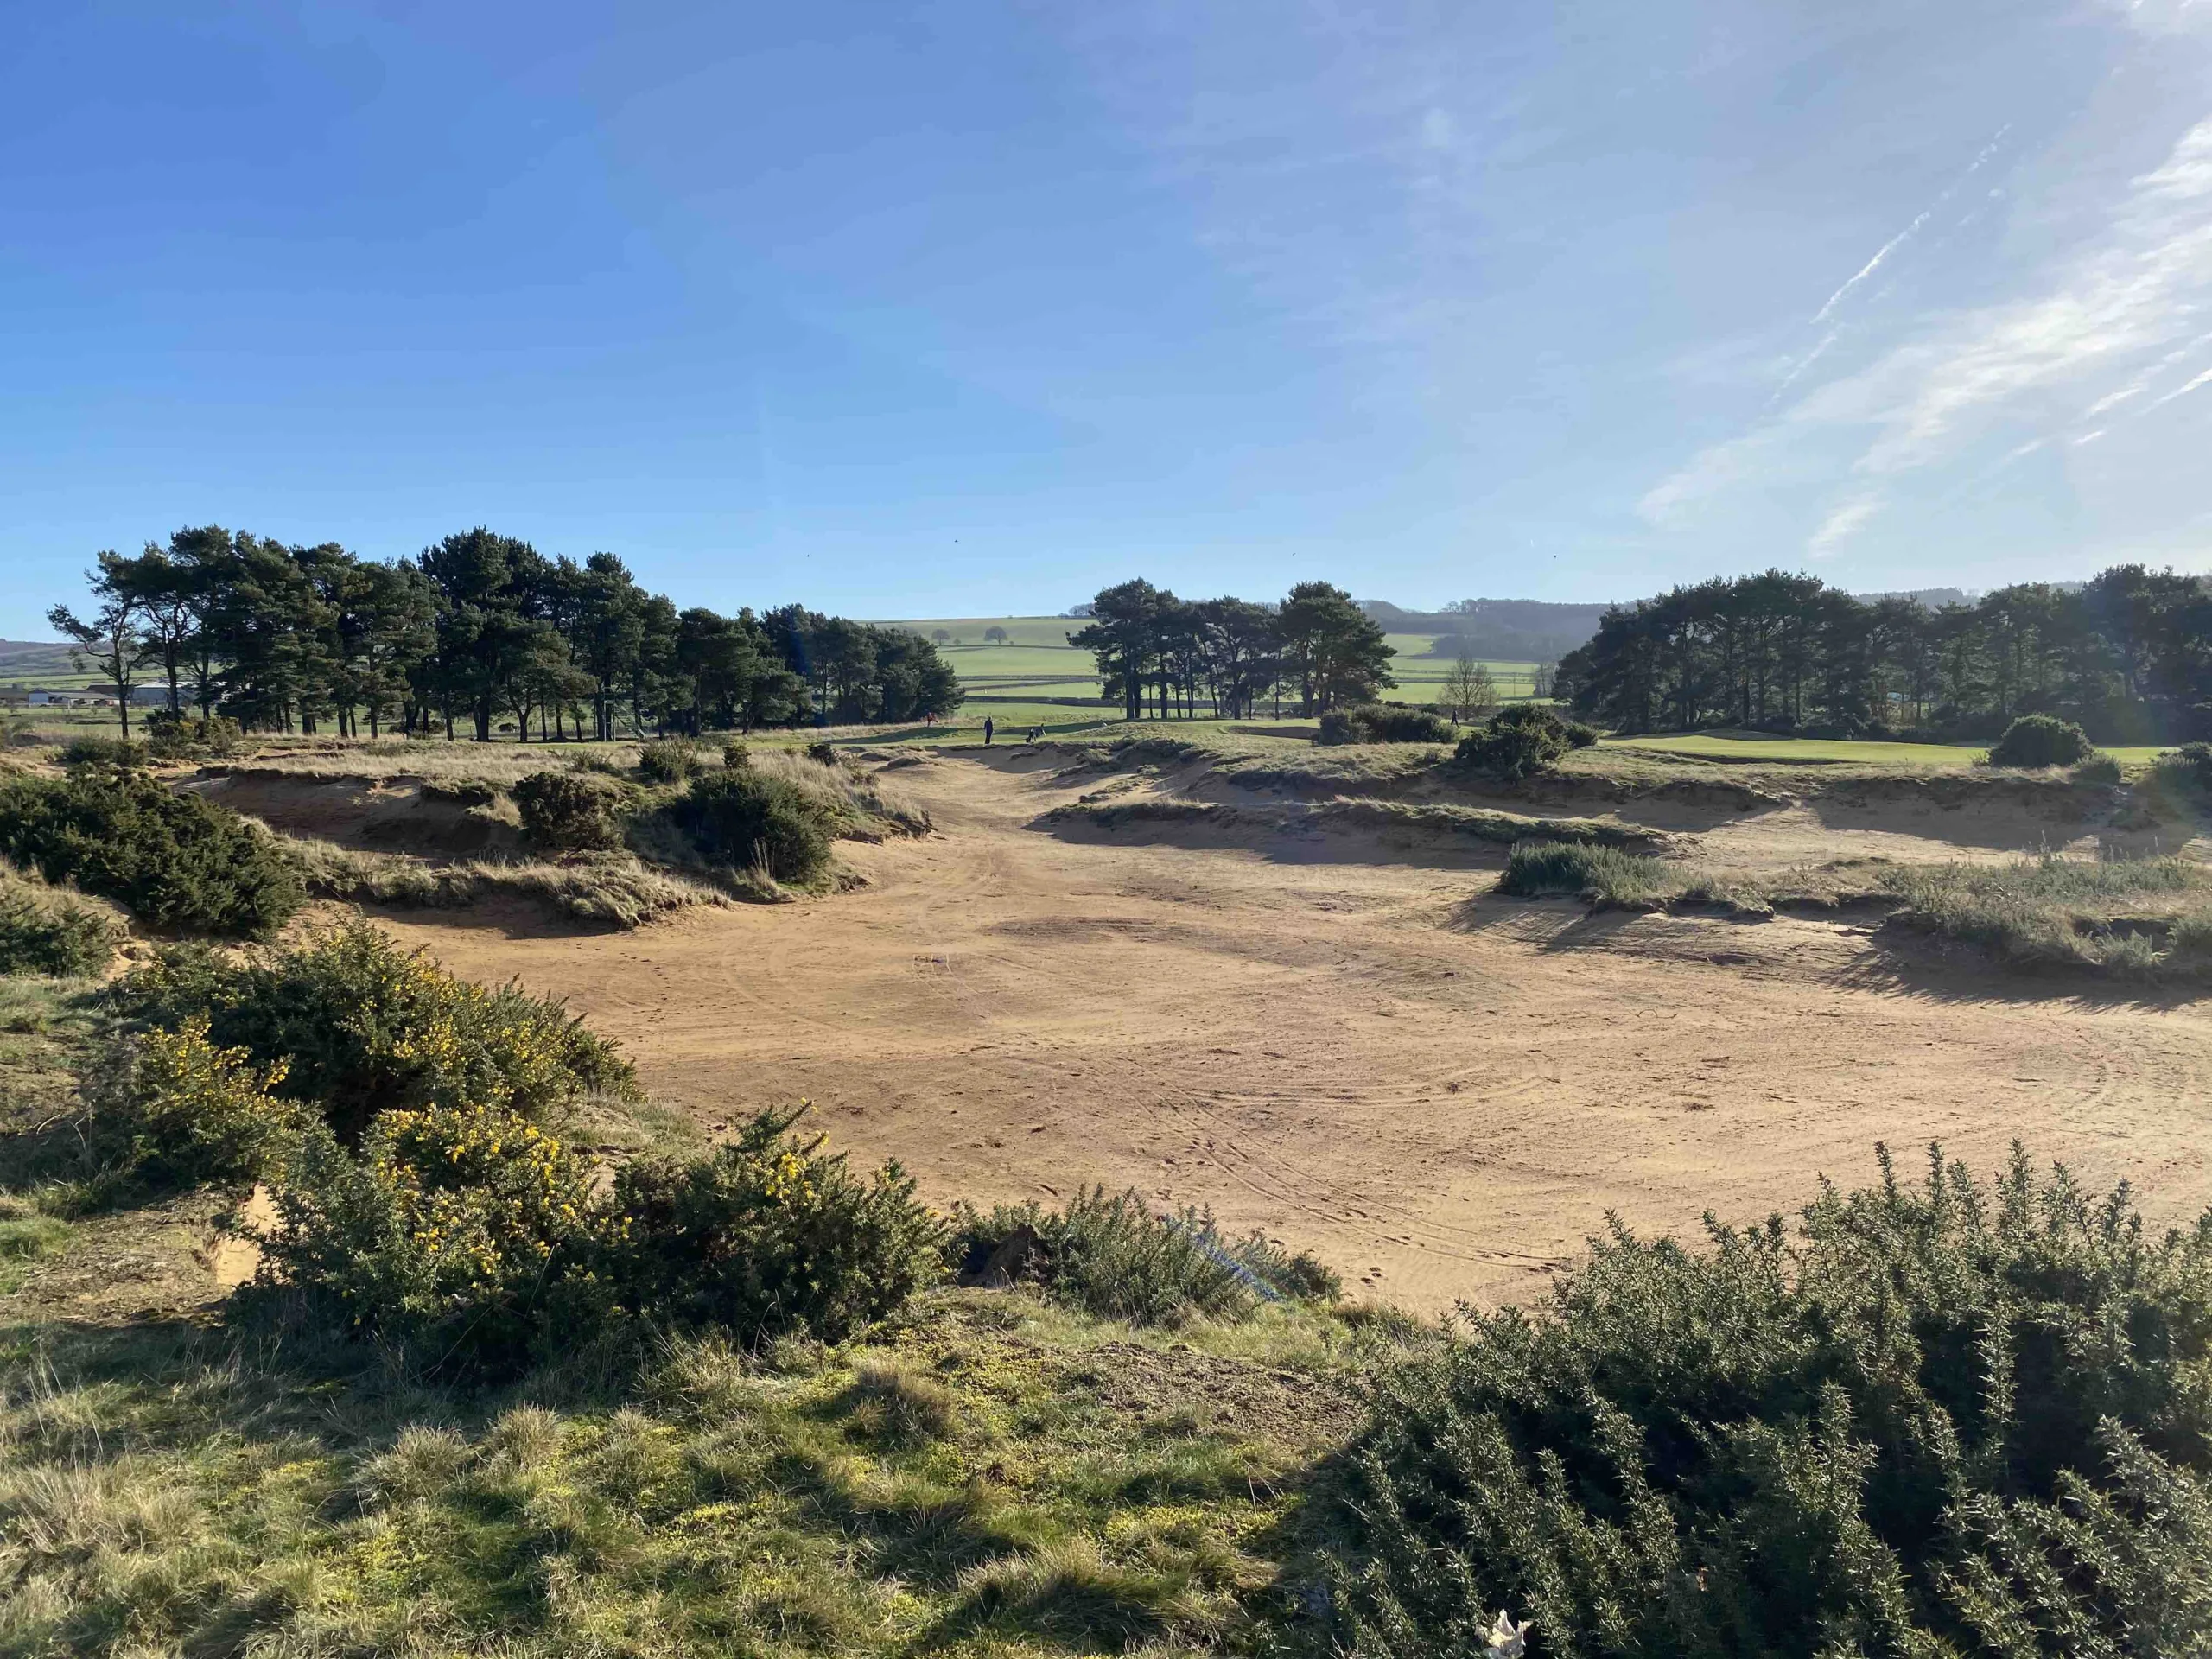 Ganton go back to the future with stunning restoration of Pandy bunker